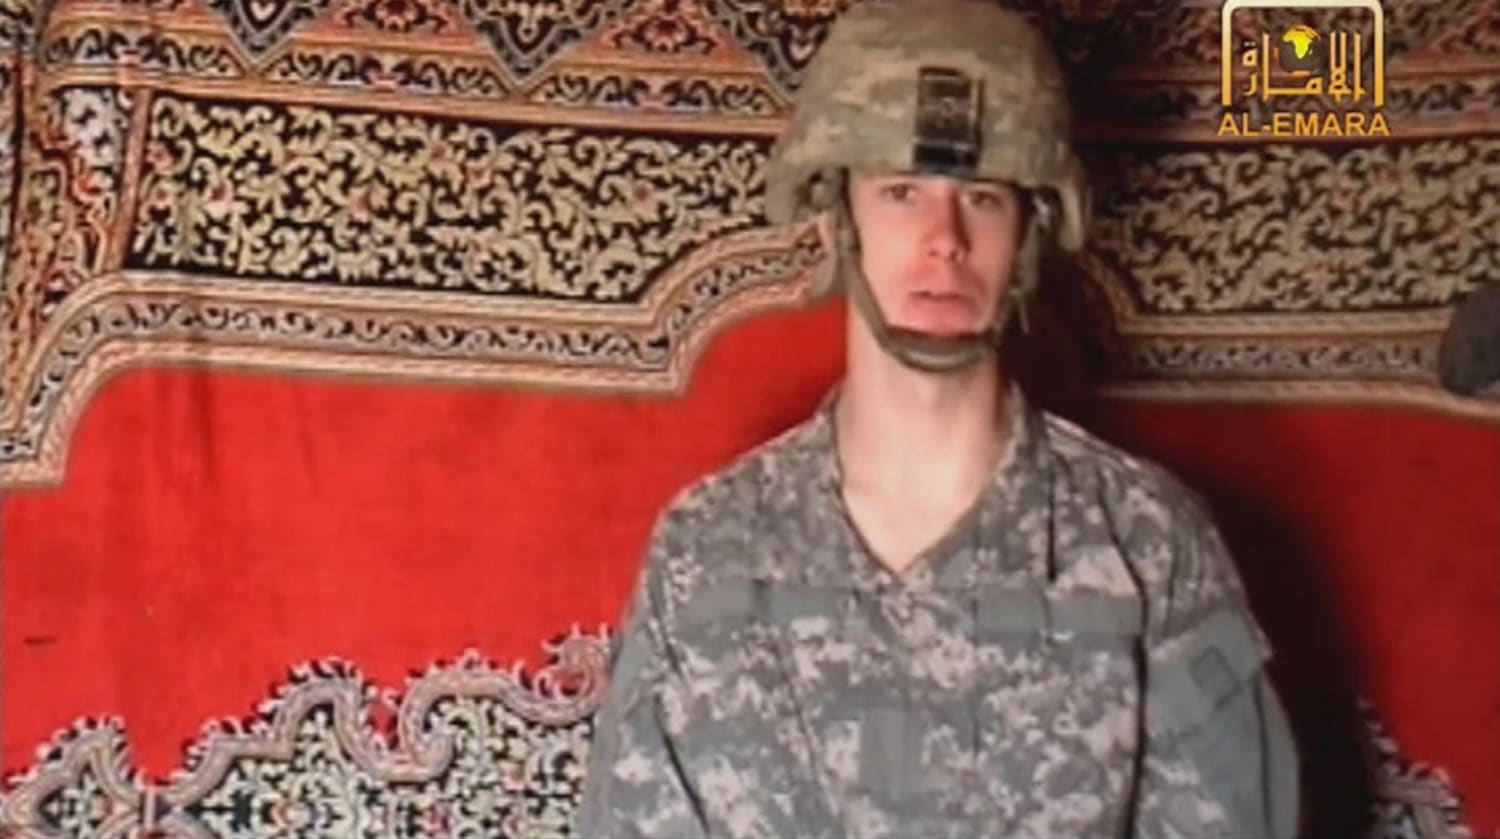 BOWE BERGDAHL Could Get Five Years for Deserting, Expert Says.